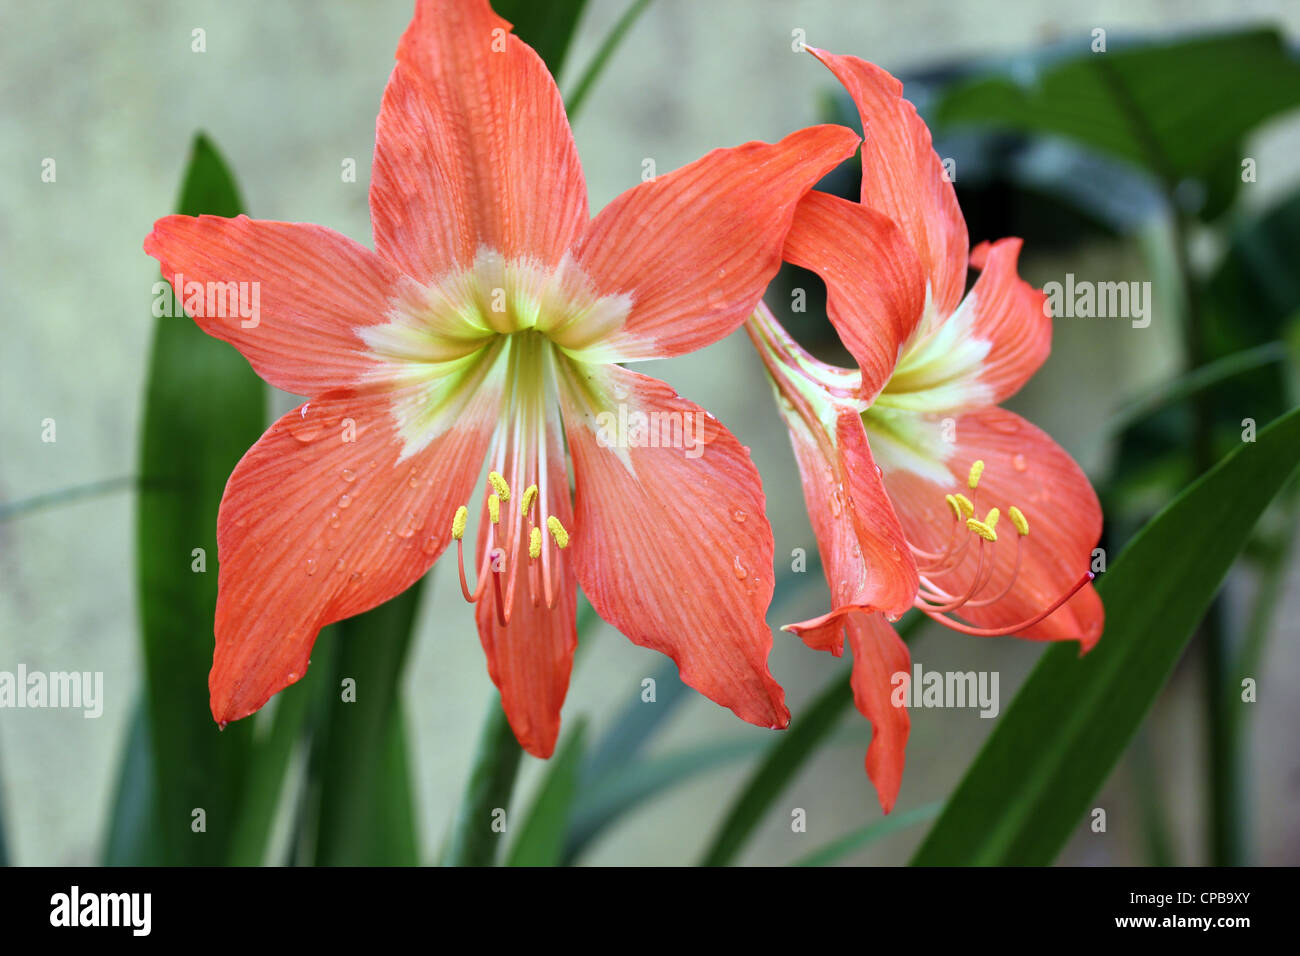 Lilly flower lilies Stock Photo